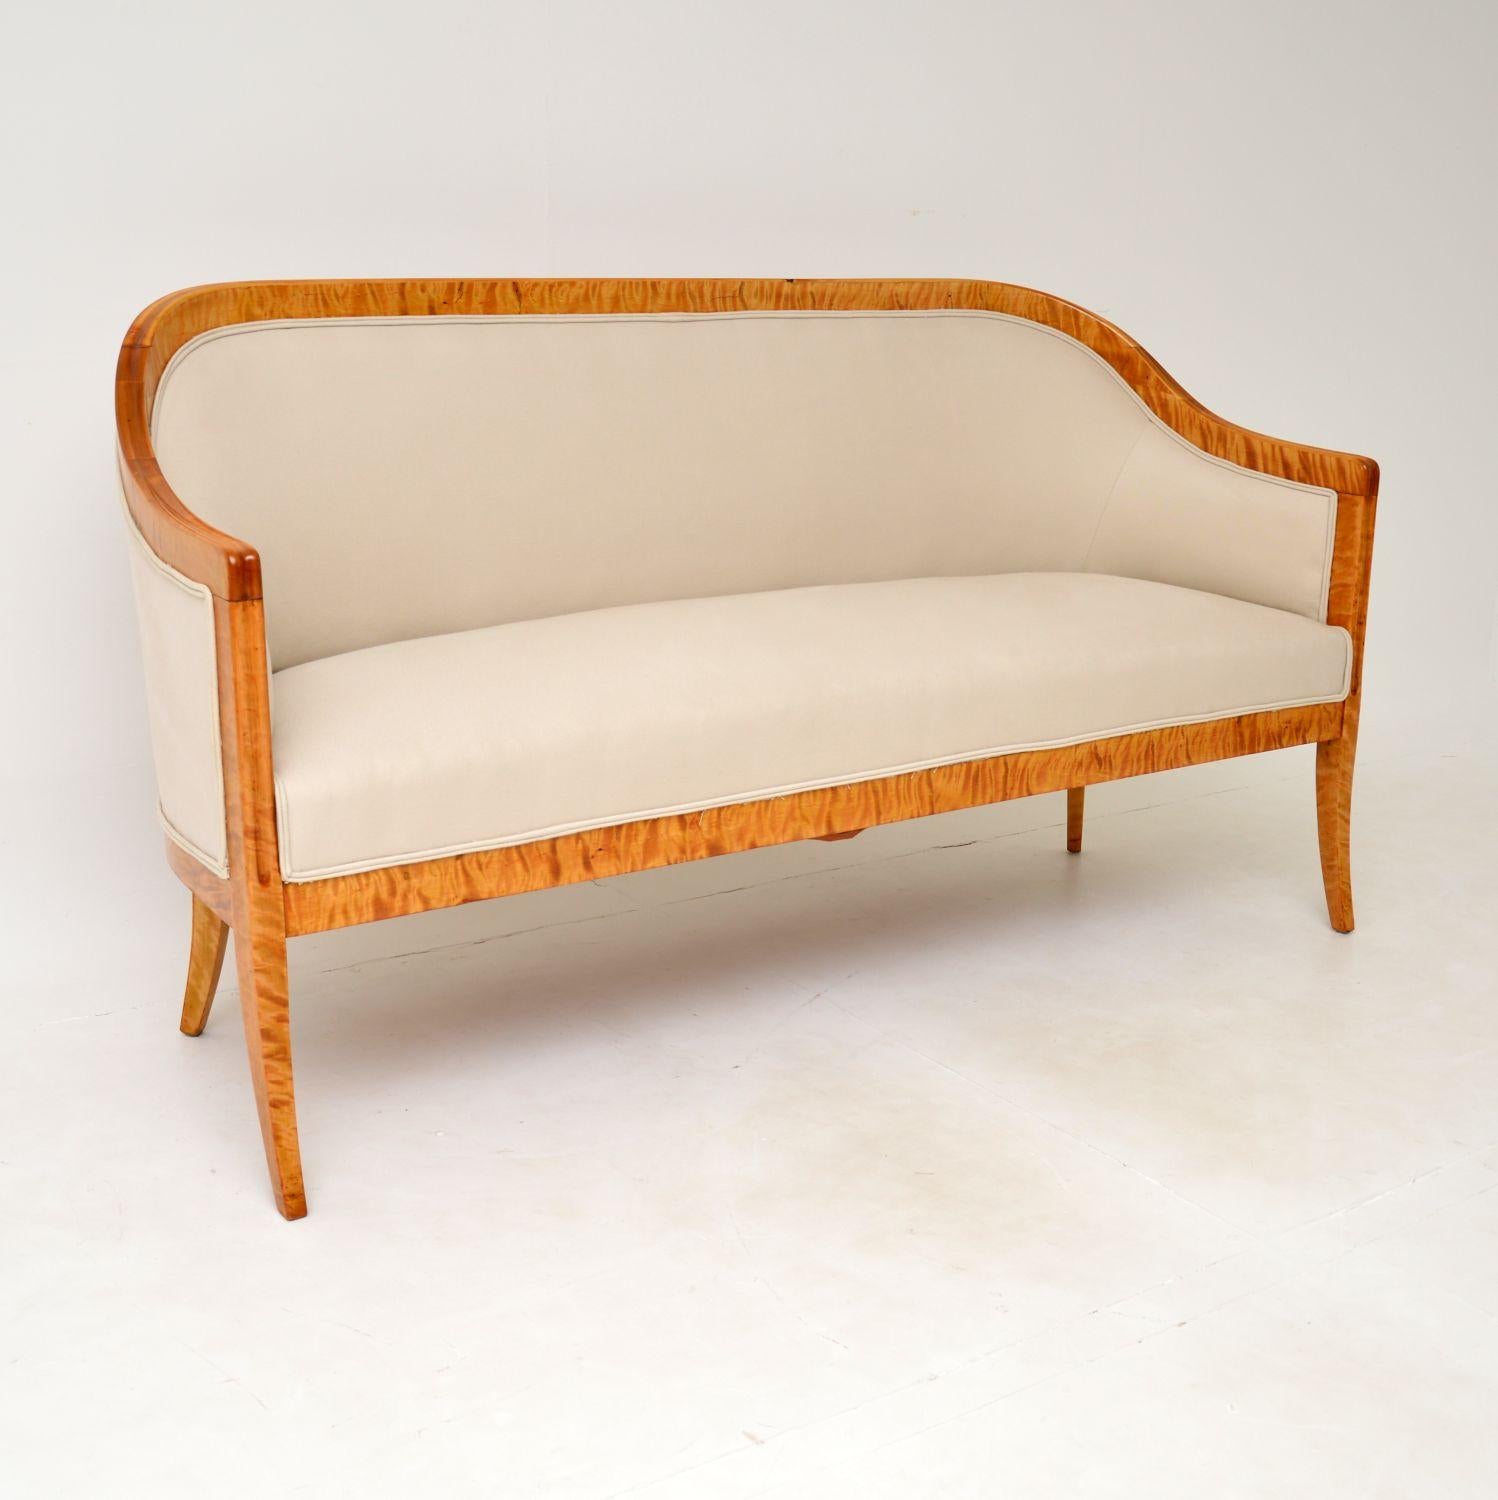 A stunning antique Swedish sofa from the Biedermeier period, which I would date from around the 1840-1860’s period.
It is beautifully made from tiger birch wood, which has a gorgeous colour and striking grain patterns. The quality is amazing, the